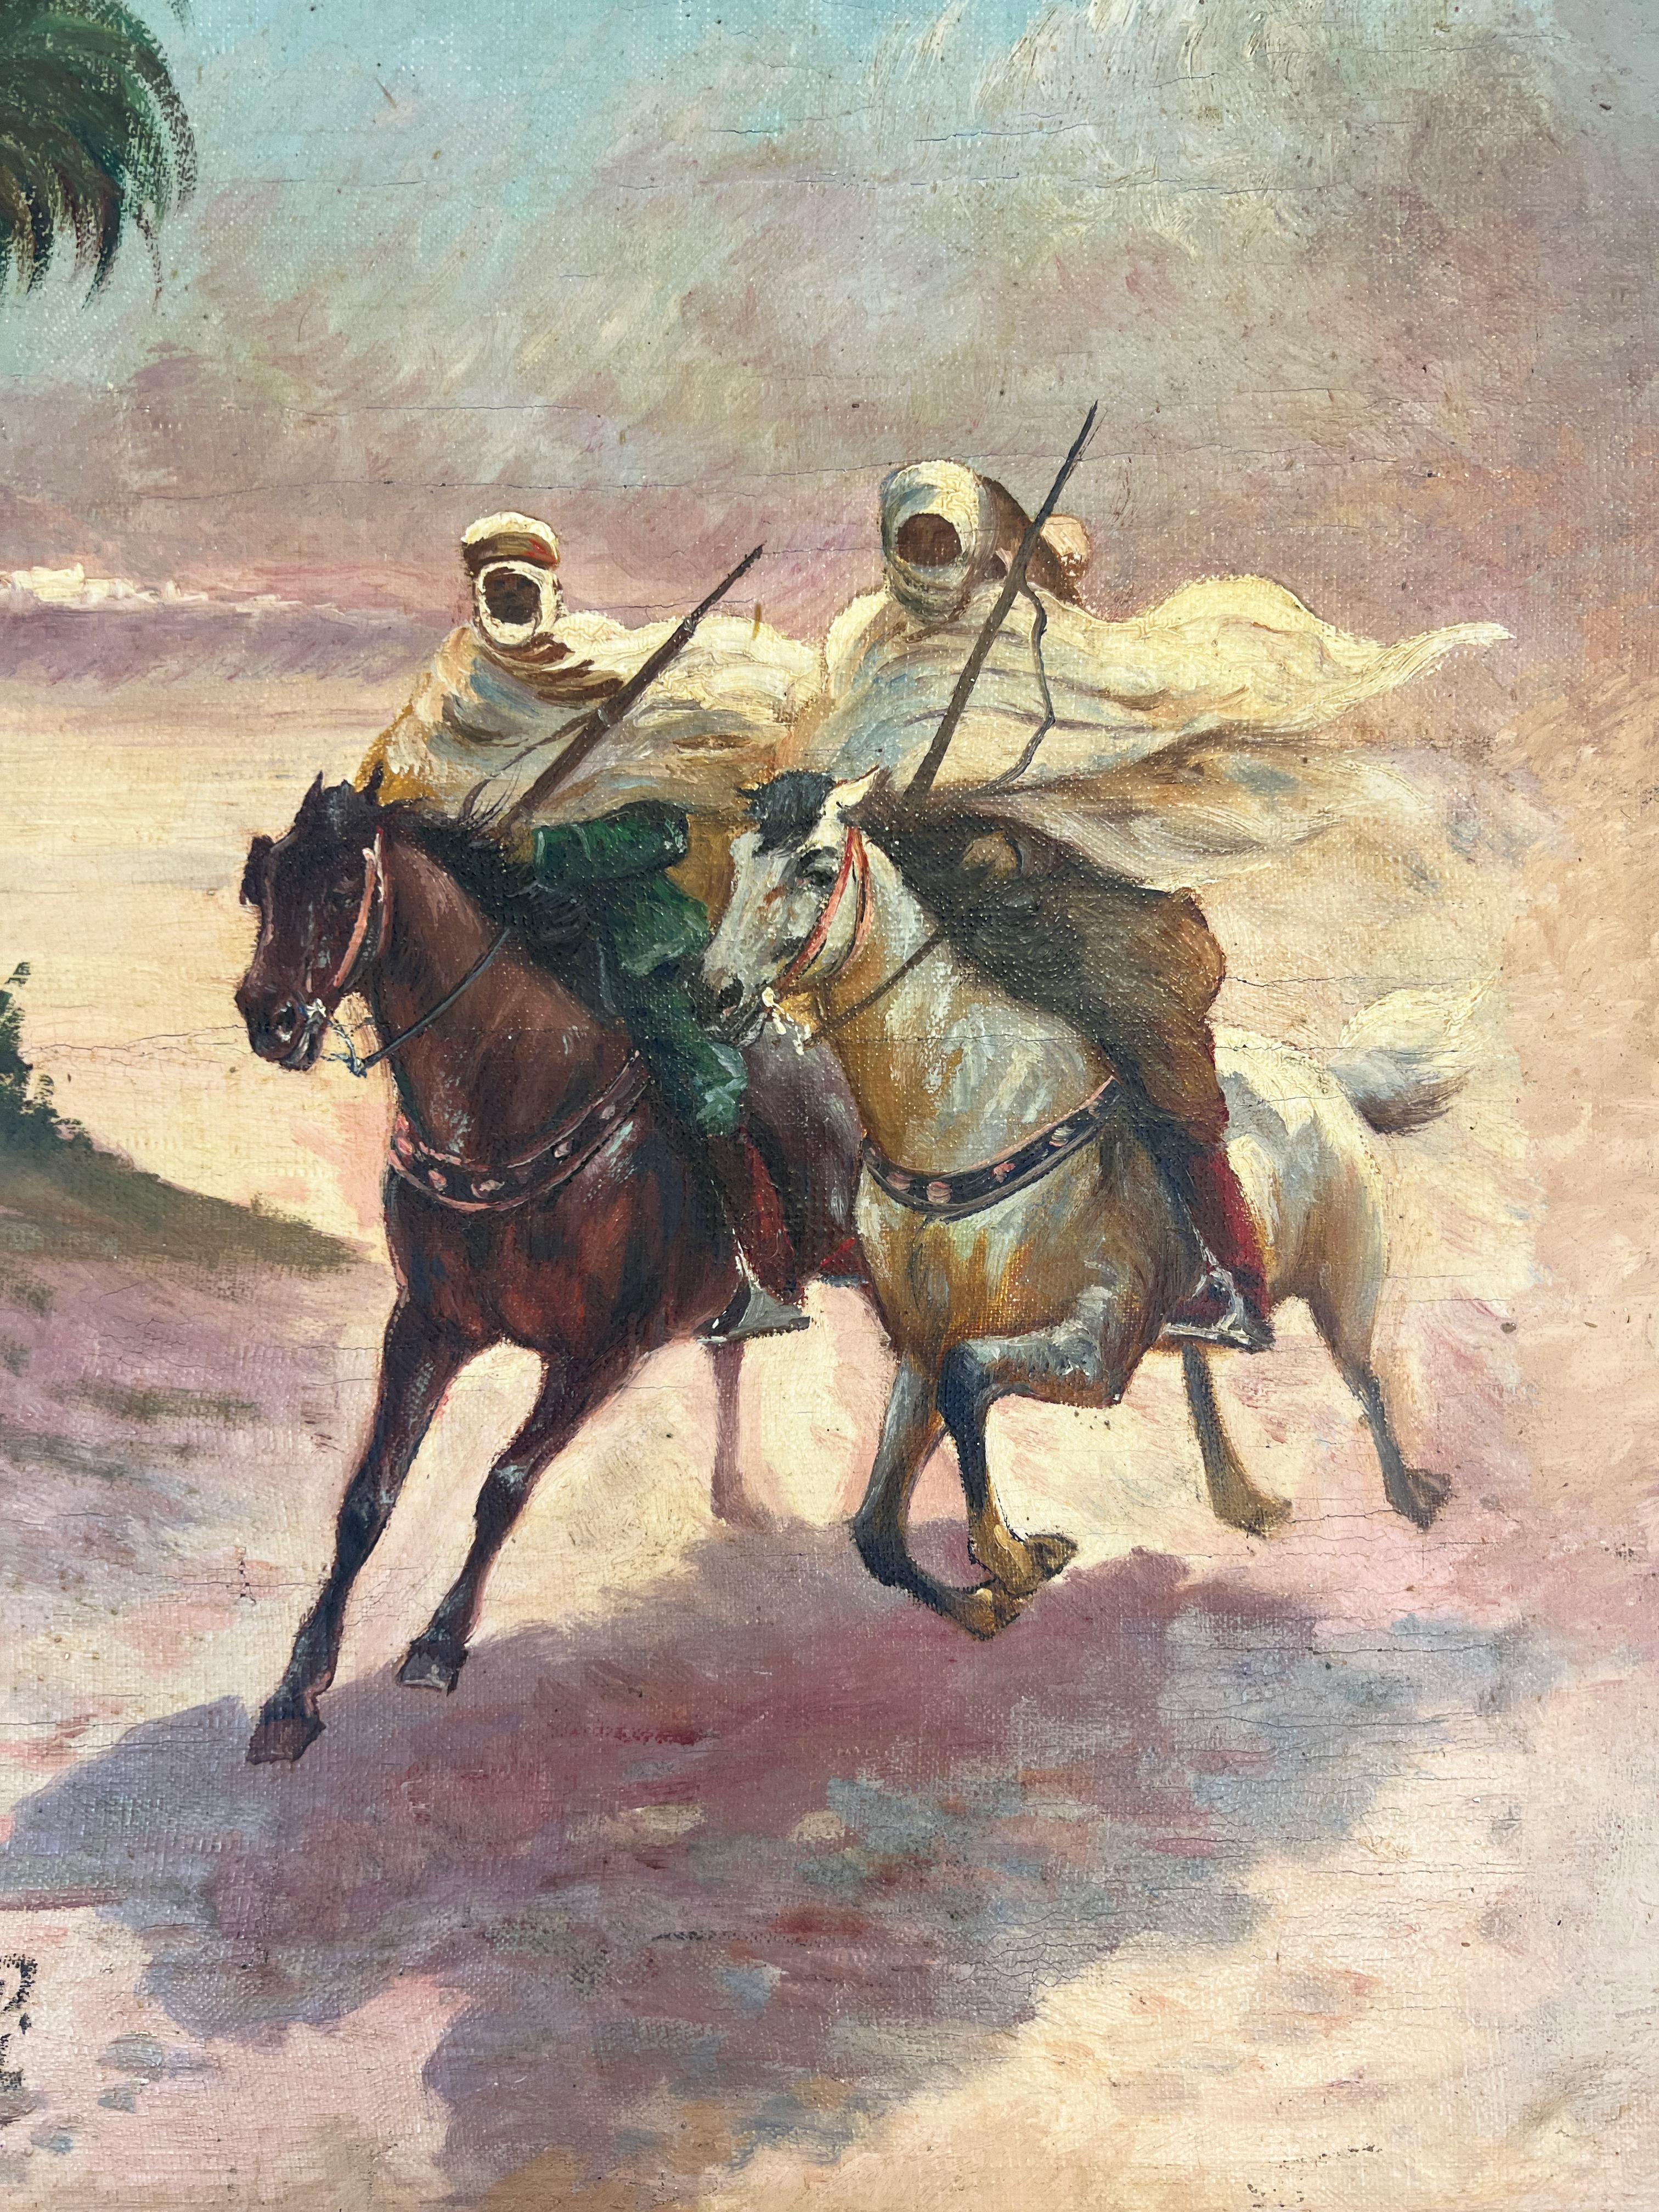 European 19th Century Orientalist Oil On Canvas Painting Of Running Horse and Arab Riders